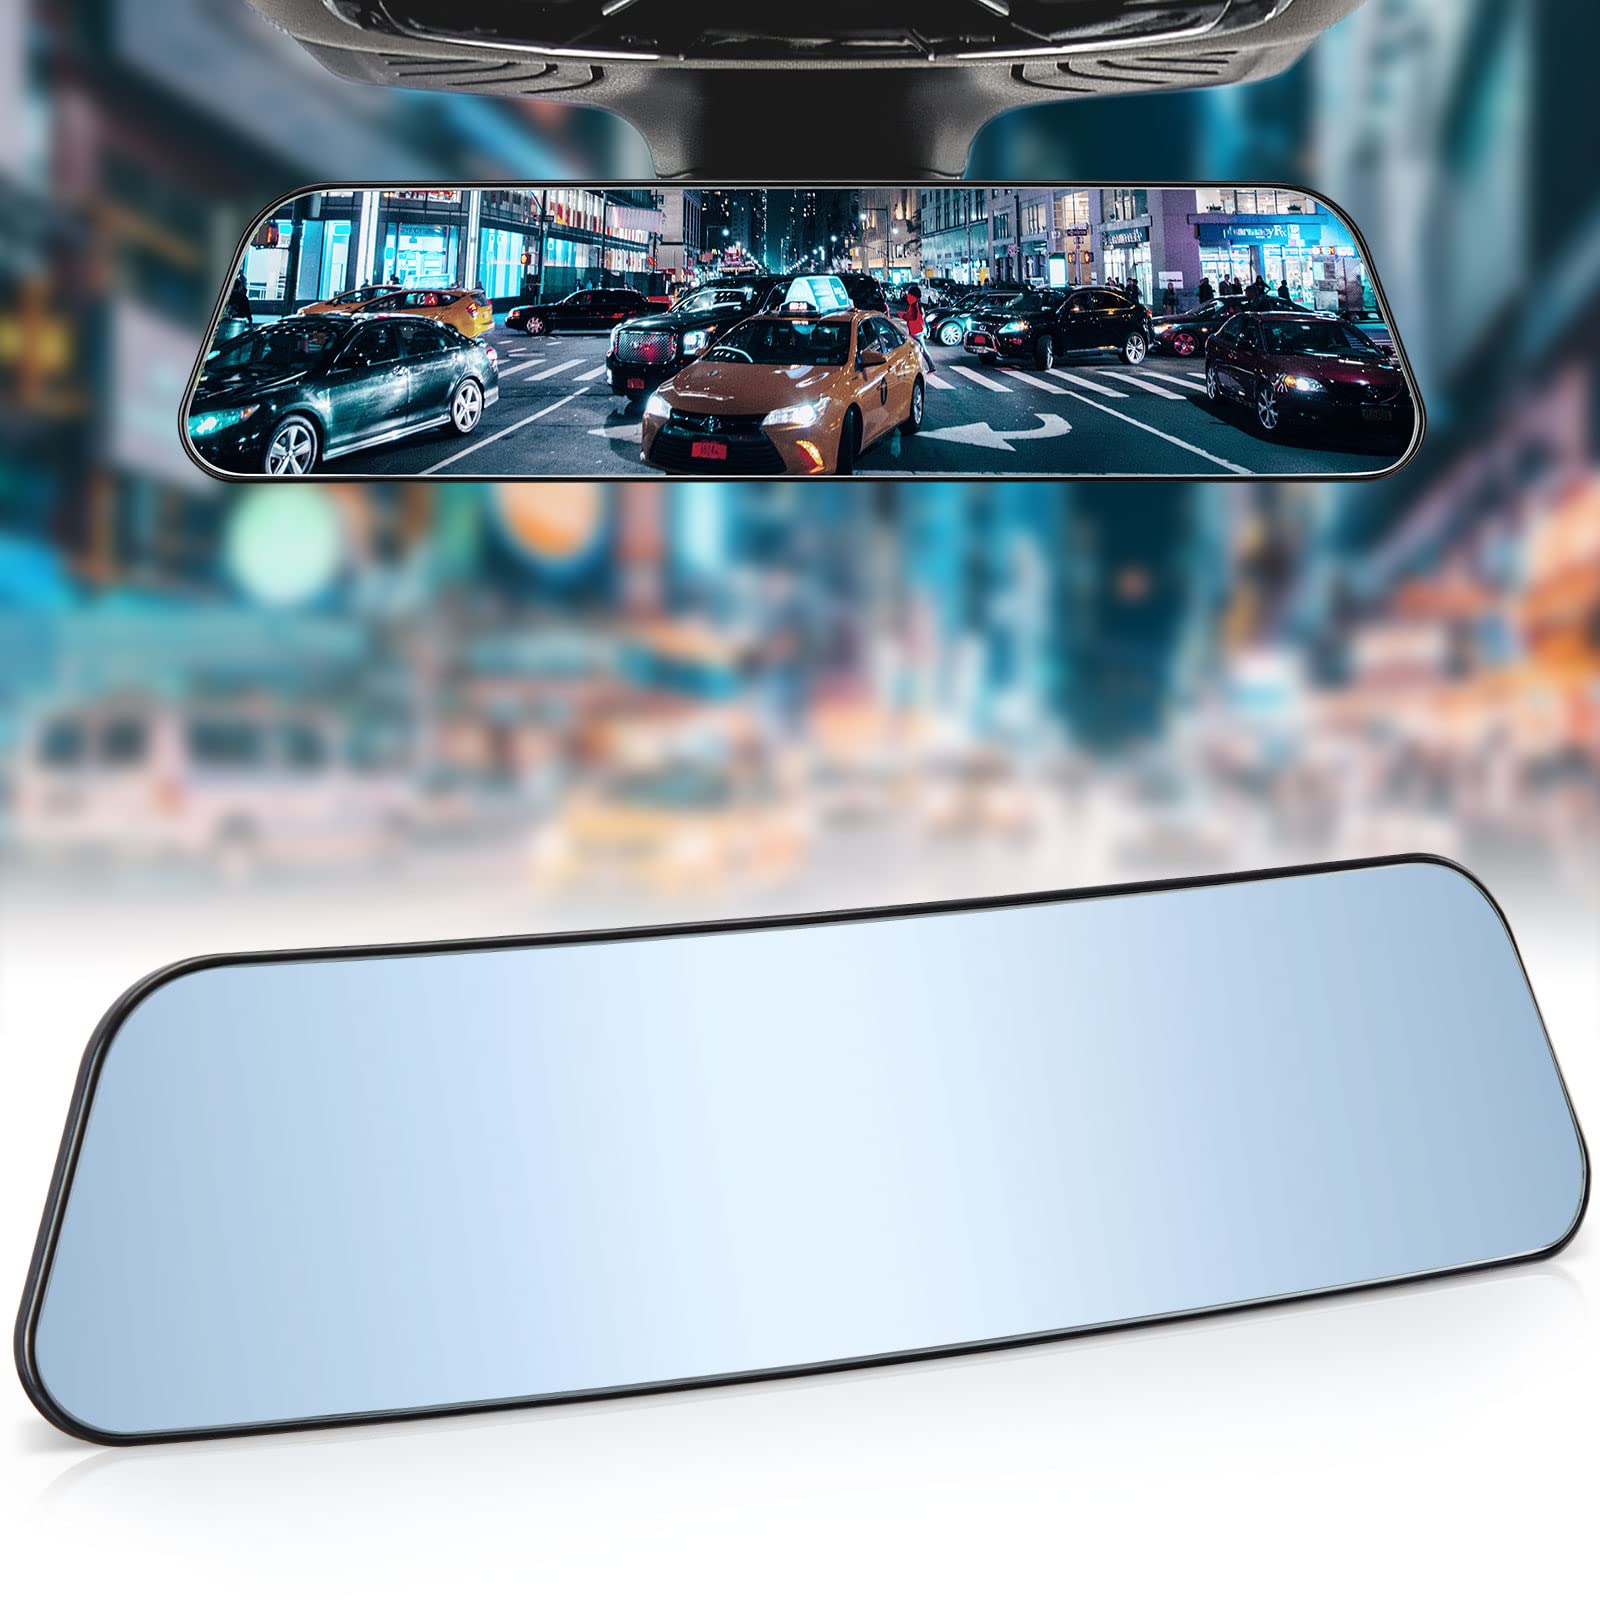 JoyTutus Rear View Mirror, Universal 11.81 Inch Panoramic Convex Interior  Clip-on Wide Angle Mirror to Reduce Blind Spot Effectively for Car SUV